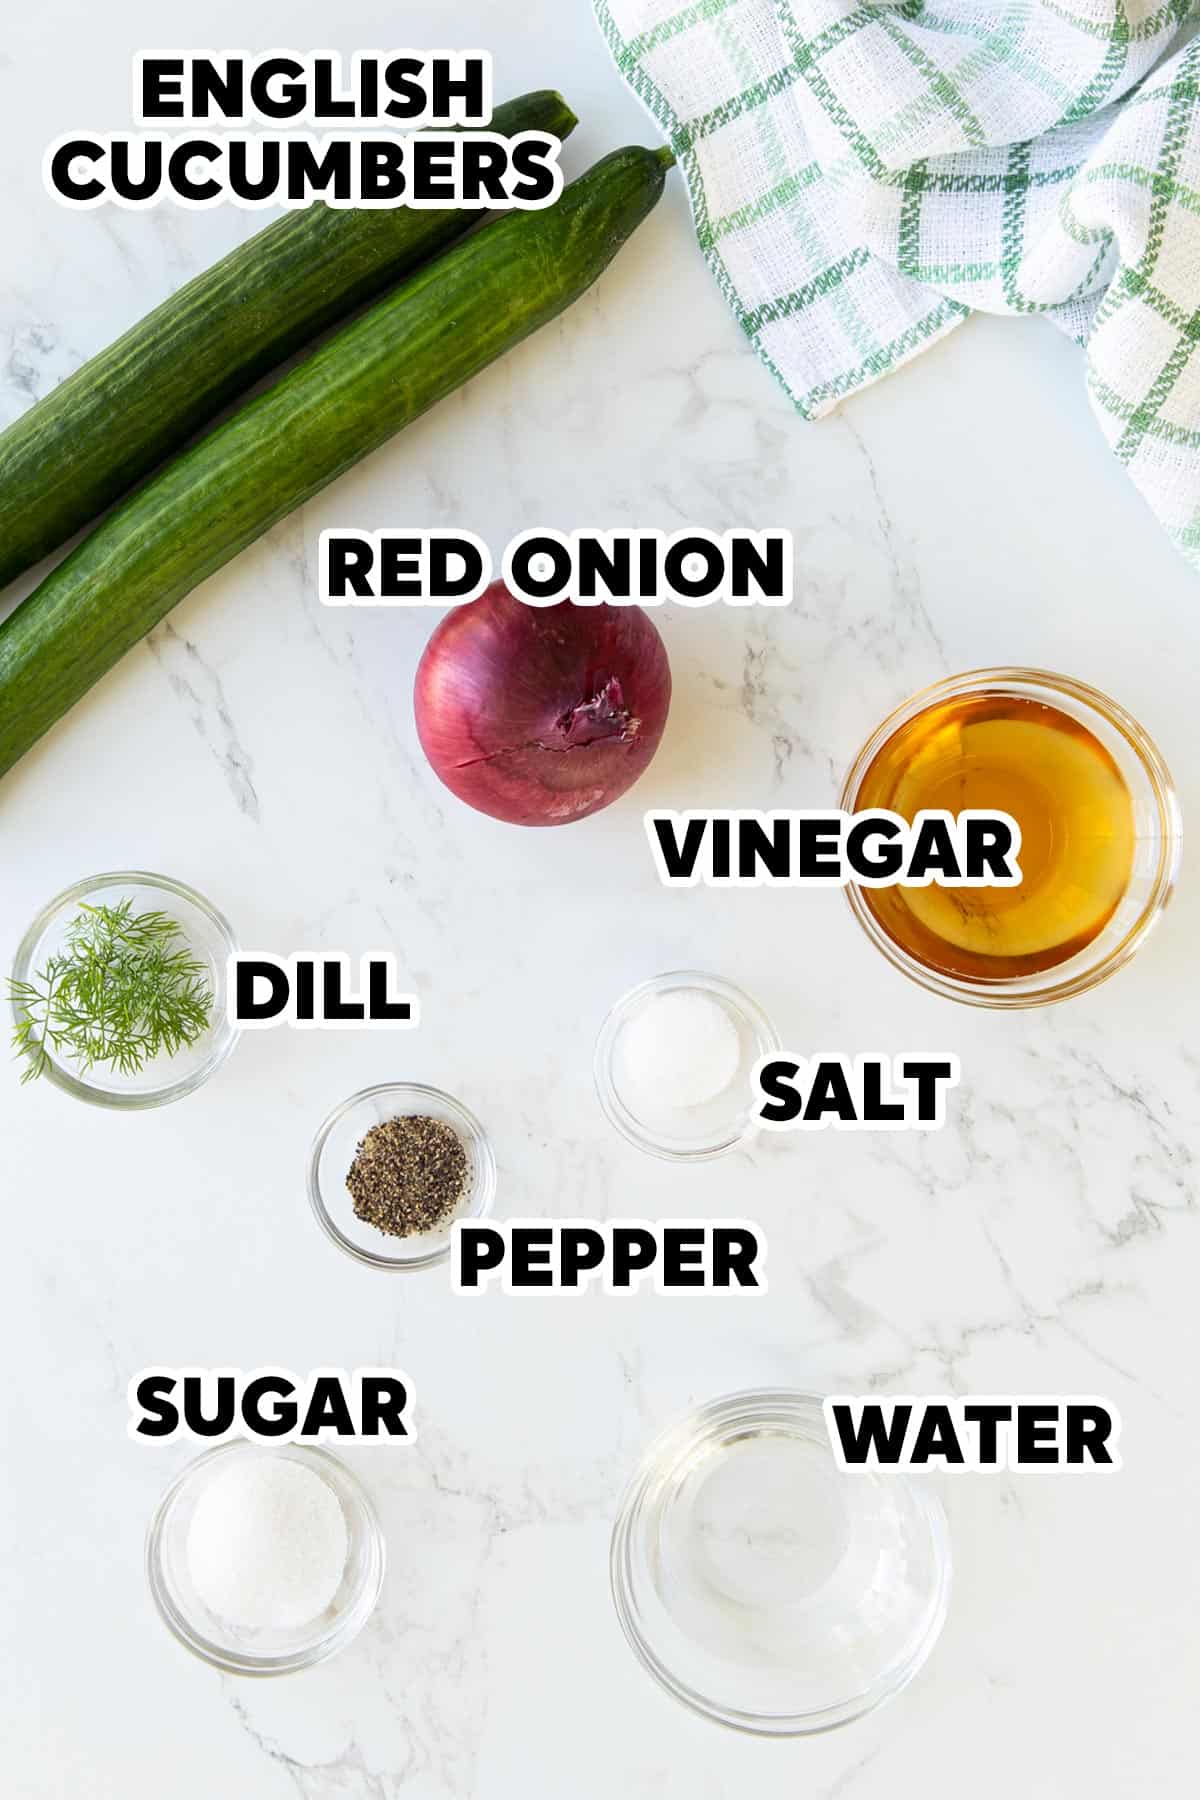 Overhead view of ingredients for cucumber and onion salad with overlay text.